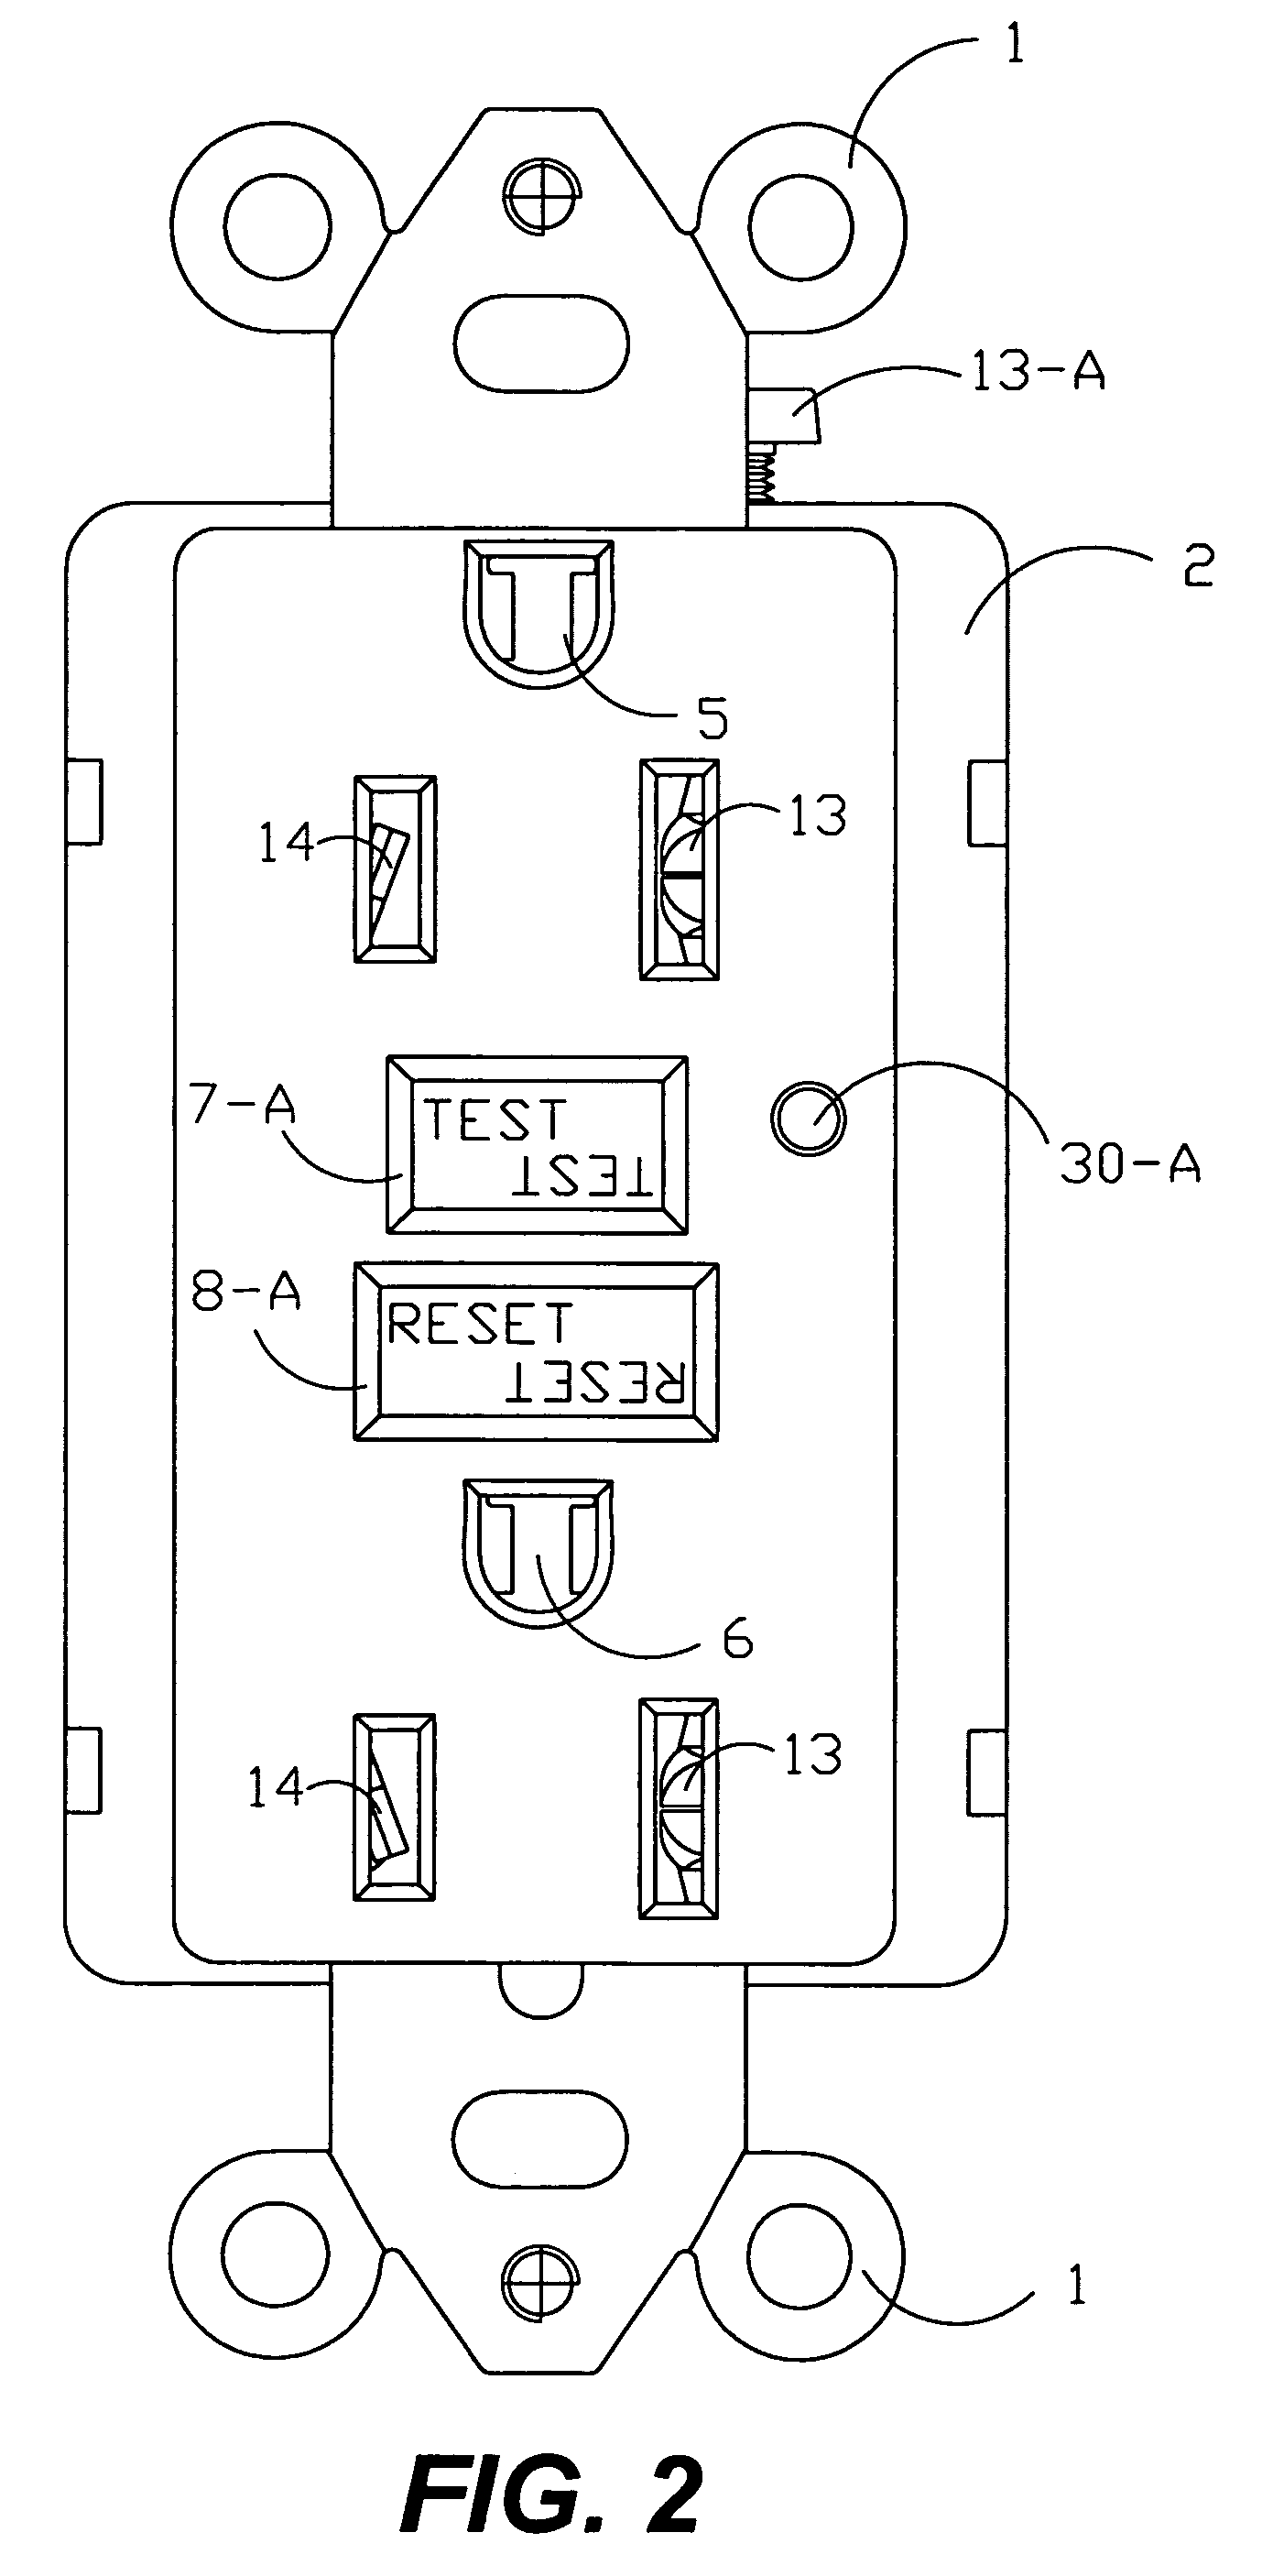 Receptacle circuit interrupting devices providing an end of life test controlled by test button